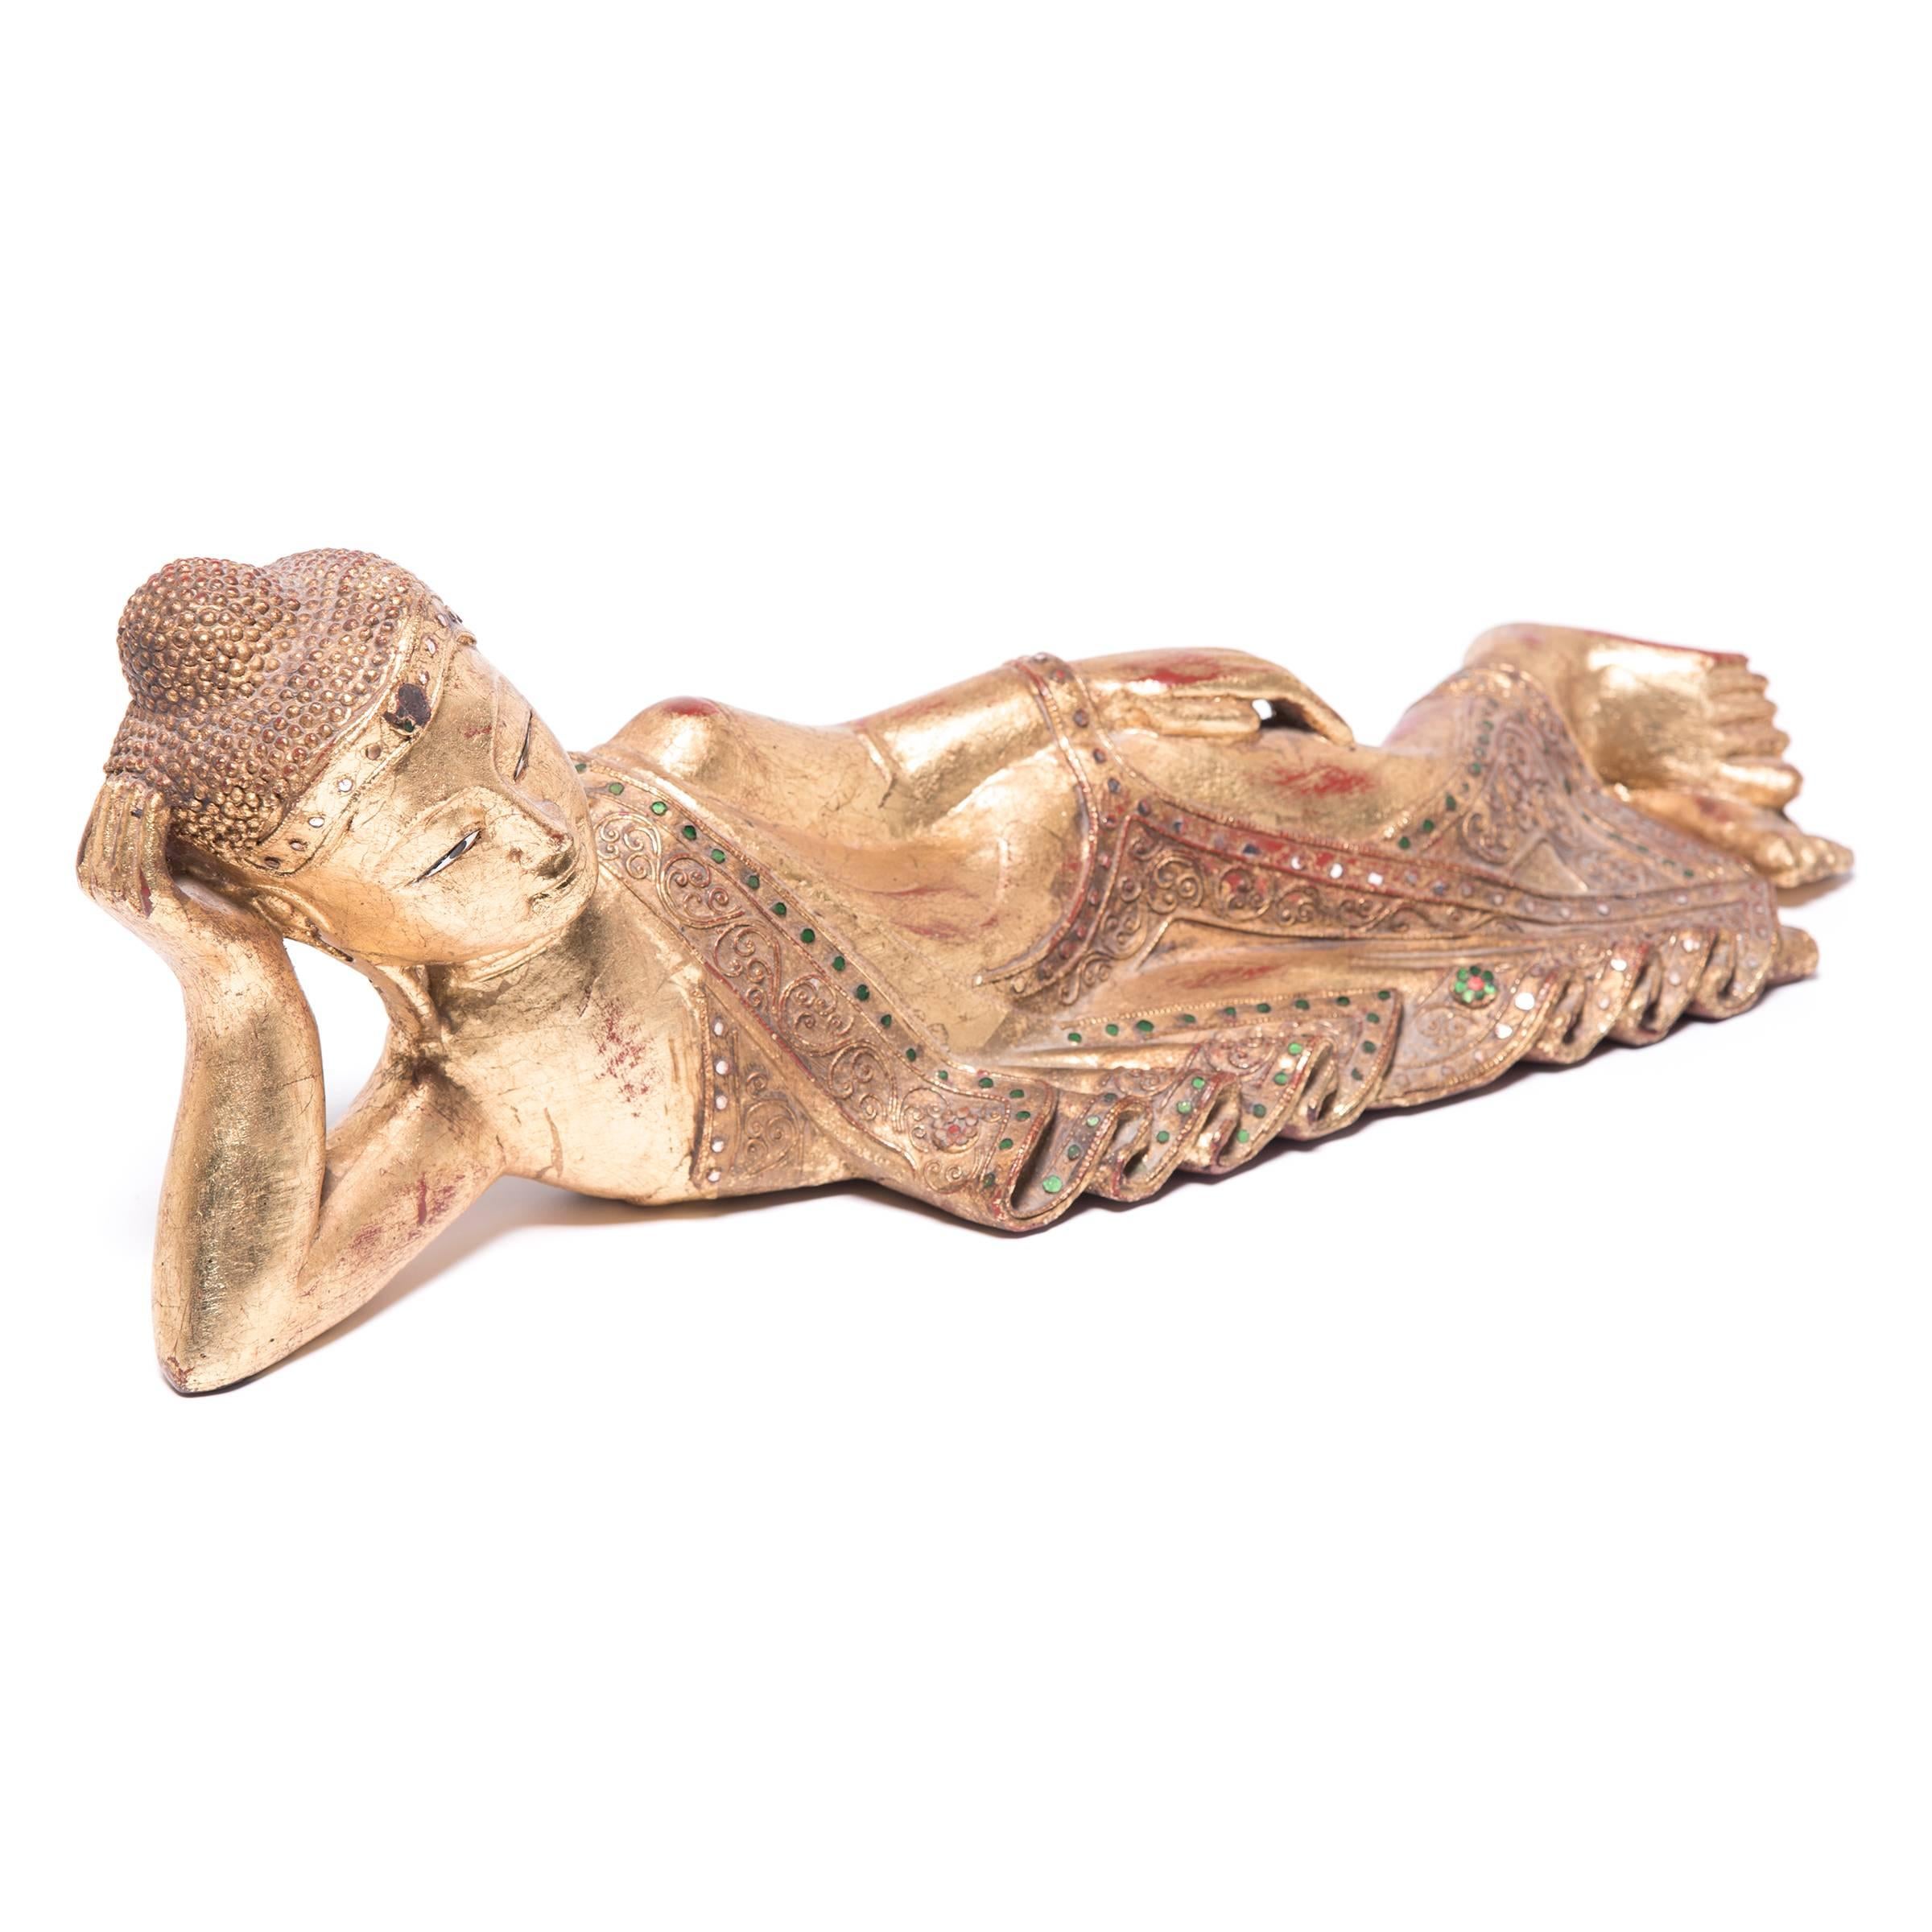 This gilded wood figure depicts Buddha in a reclining position. The posture is that of Nirvana Buddha, when the historical Buddha experiences his last moments on earth prior to entering nirvana and thereby breaking the cycle of birth, death and